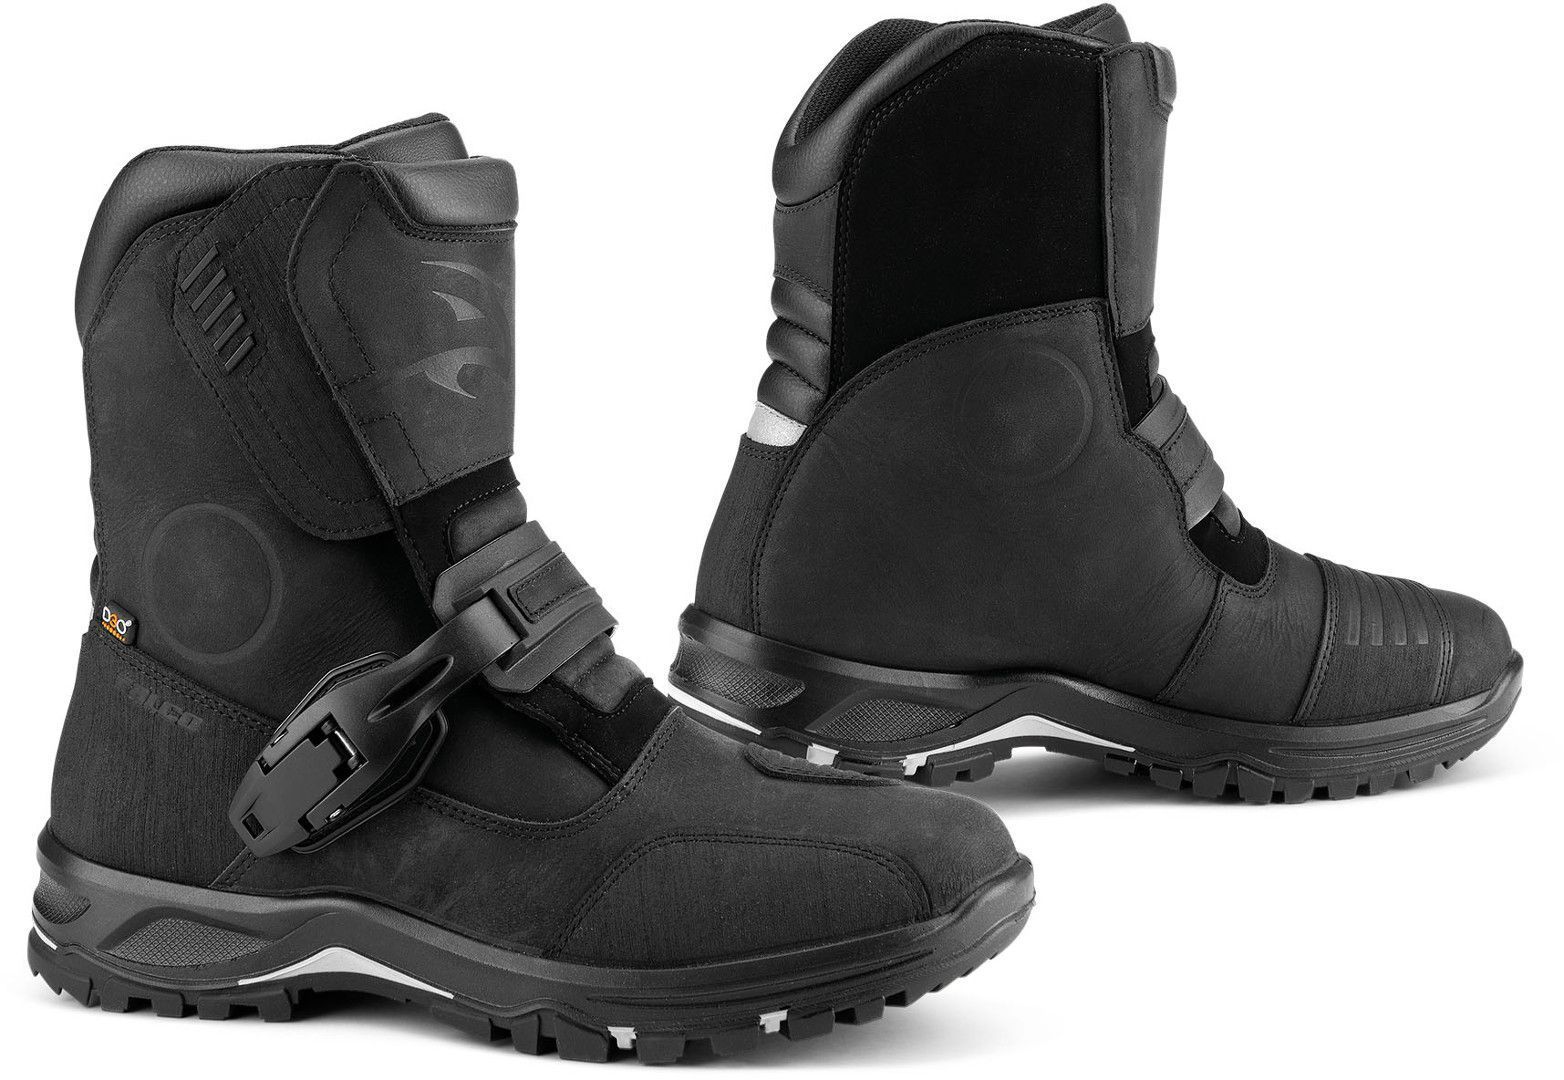 bottes pour pied fort et mollet costaud ?? - Page 2 50301201_Marshall_Black